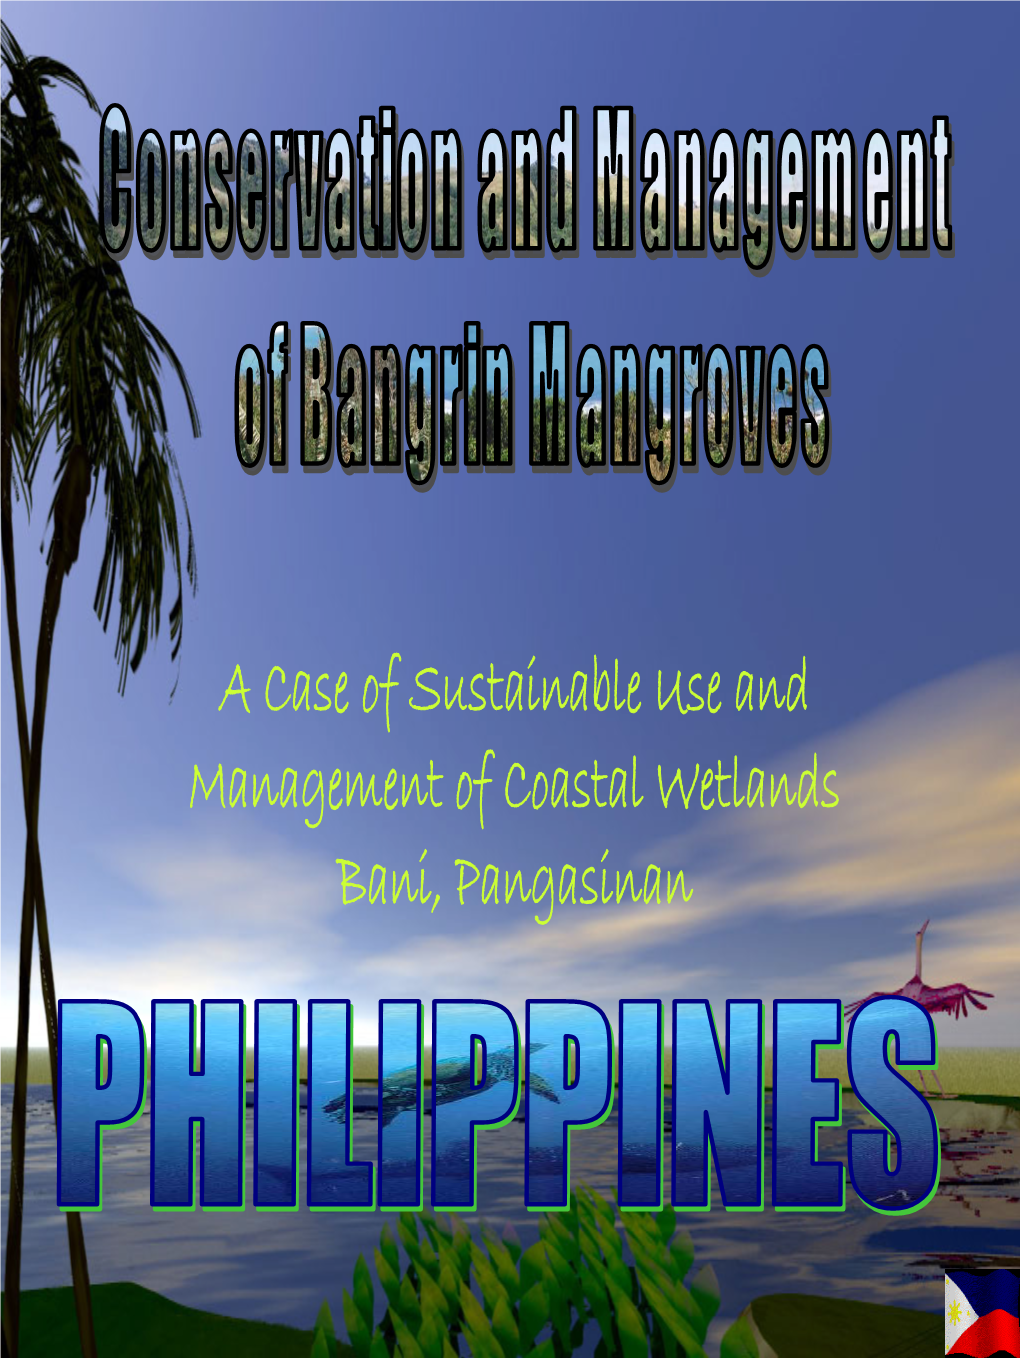 A Case of Sustainable Use and Management of Coastal Wetlands